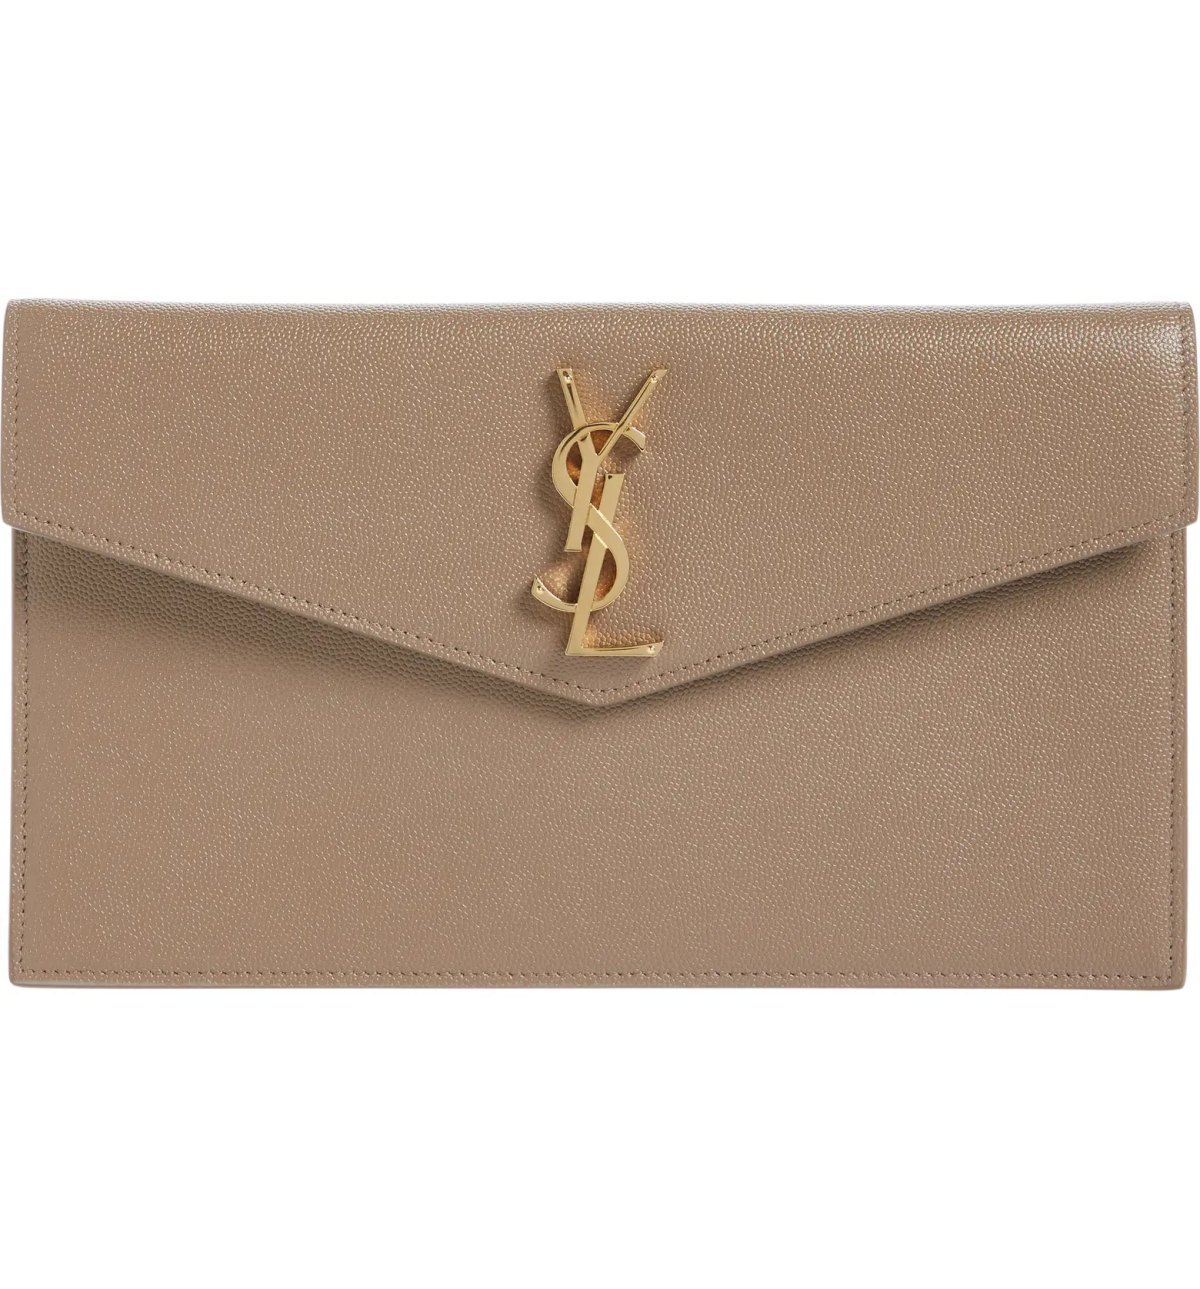 My Saint Laurent Uptown Leather Clutch Review - Sassy In The City